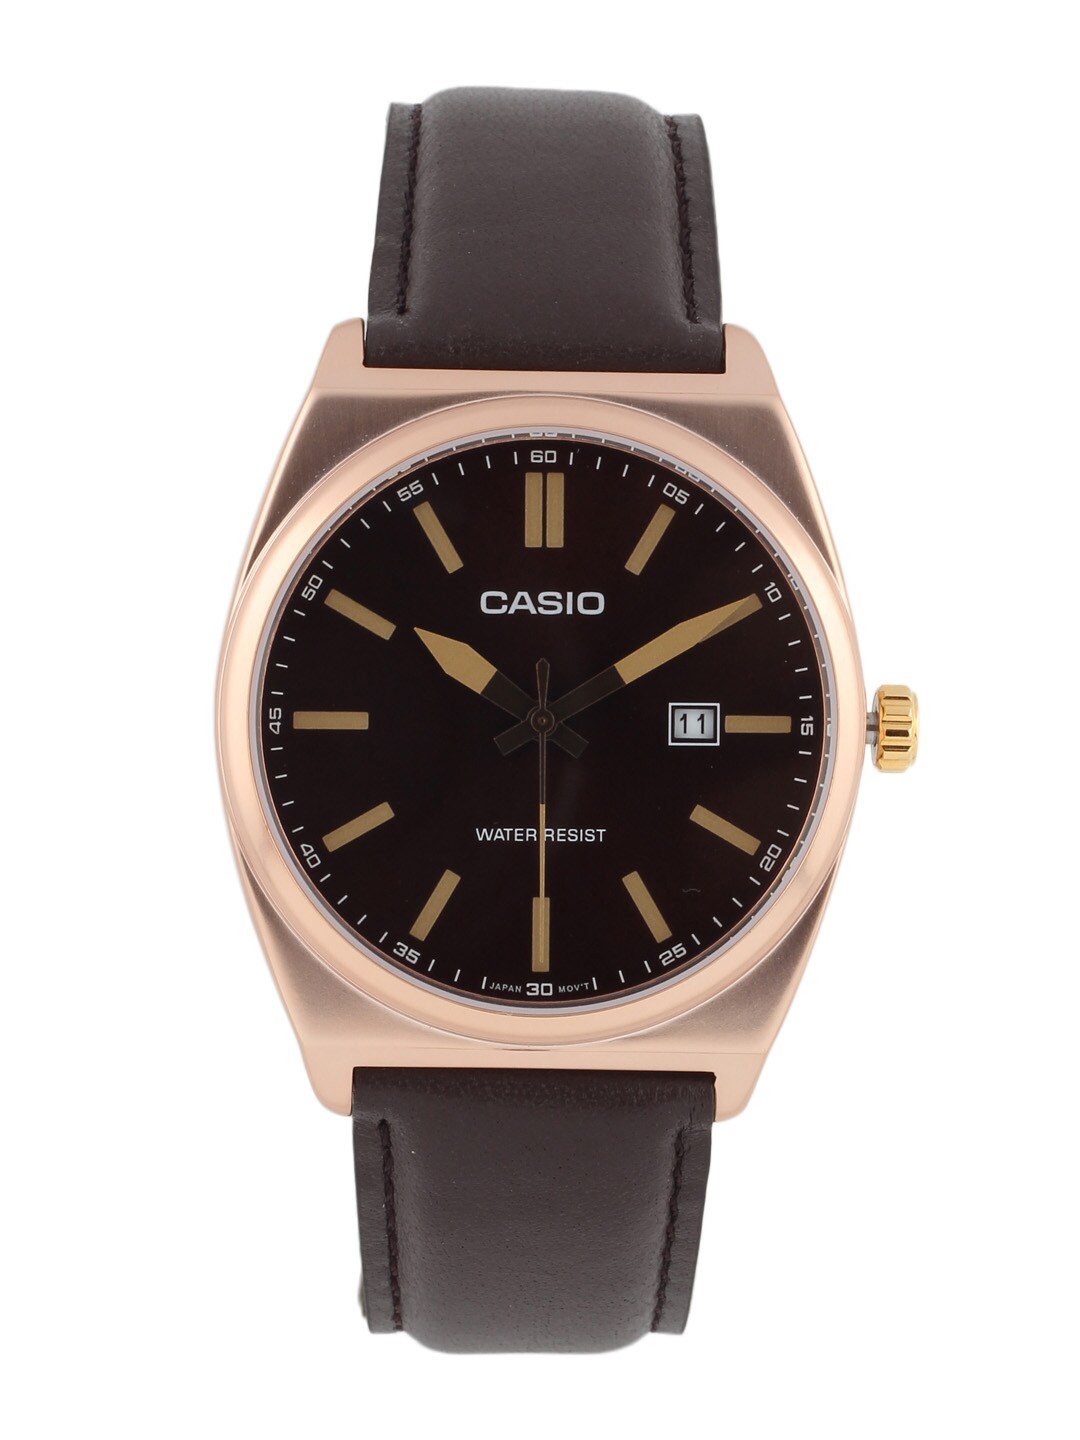 CASIO ENTICER Men Brown Dial Analogue Watch A643